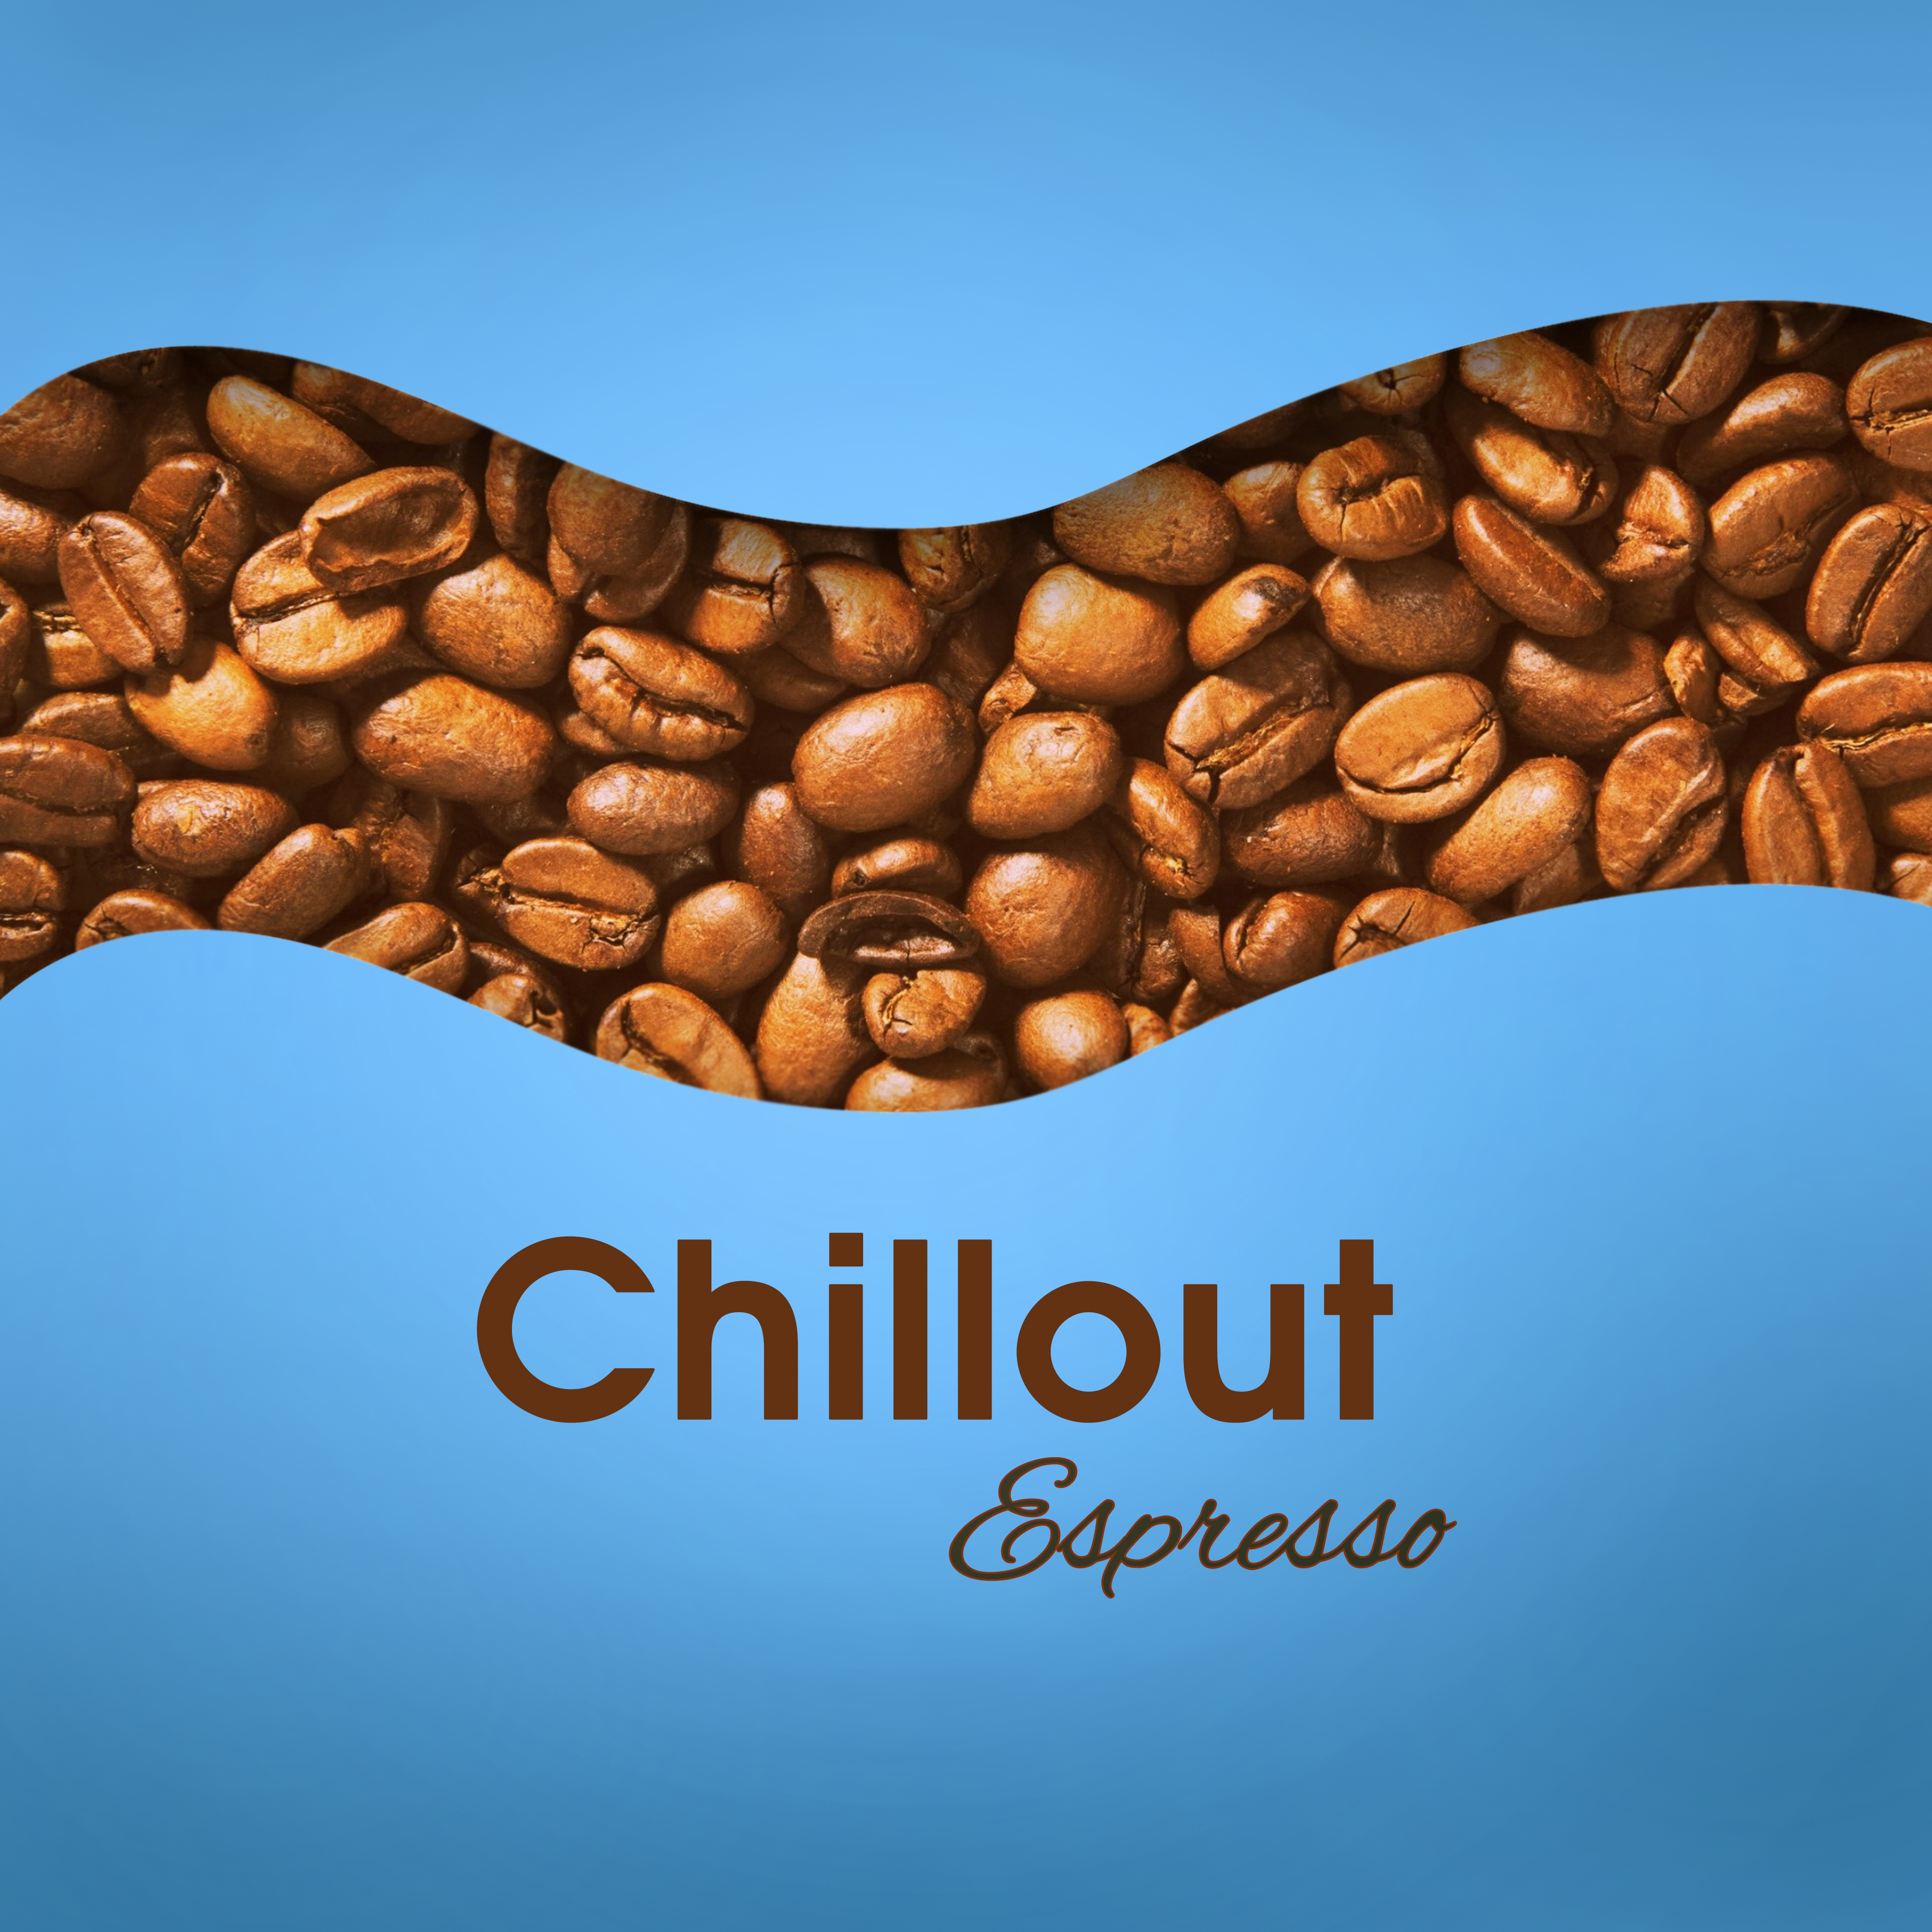 Chillout Espresso - Sensual Chill Out, Romantic Music, Relax & Chill, Deep Chill Out, Hot Coffee Time